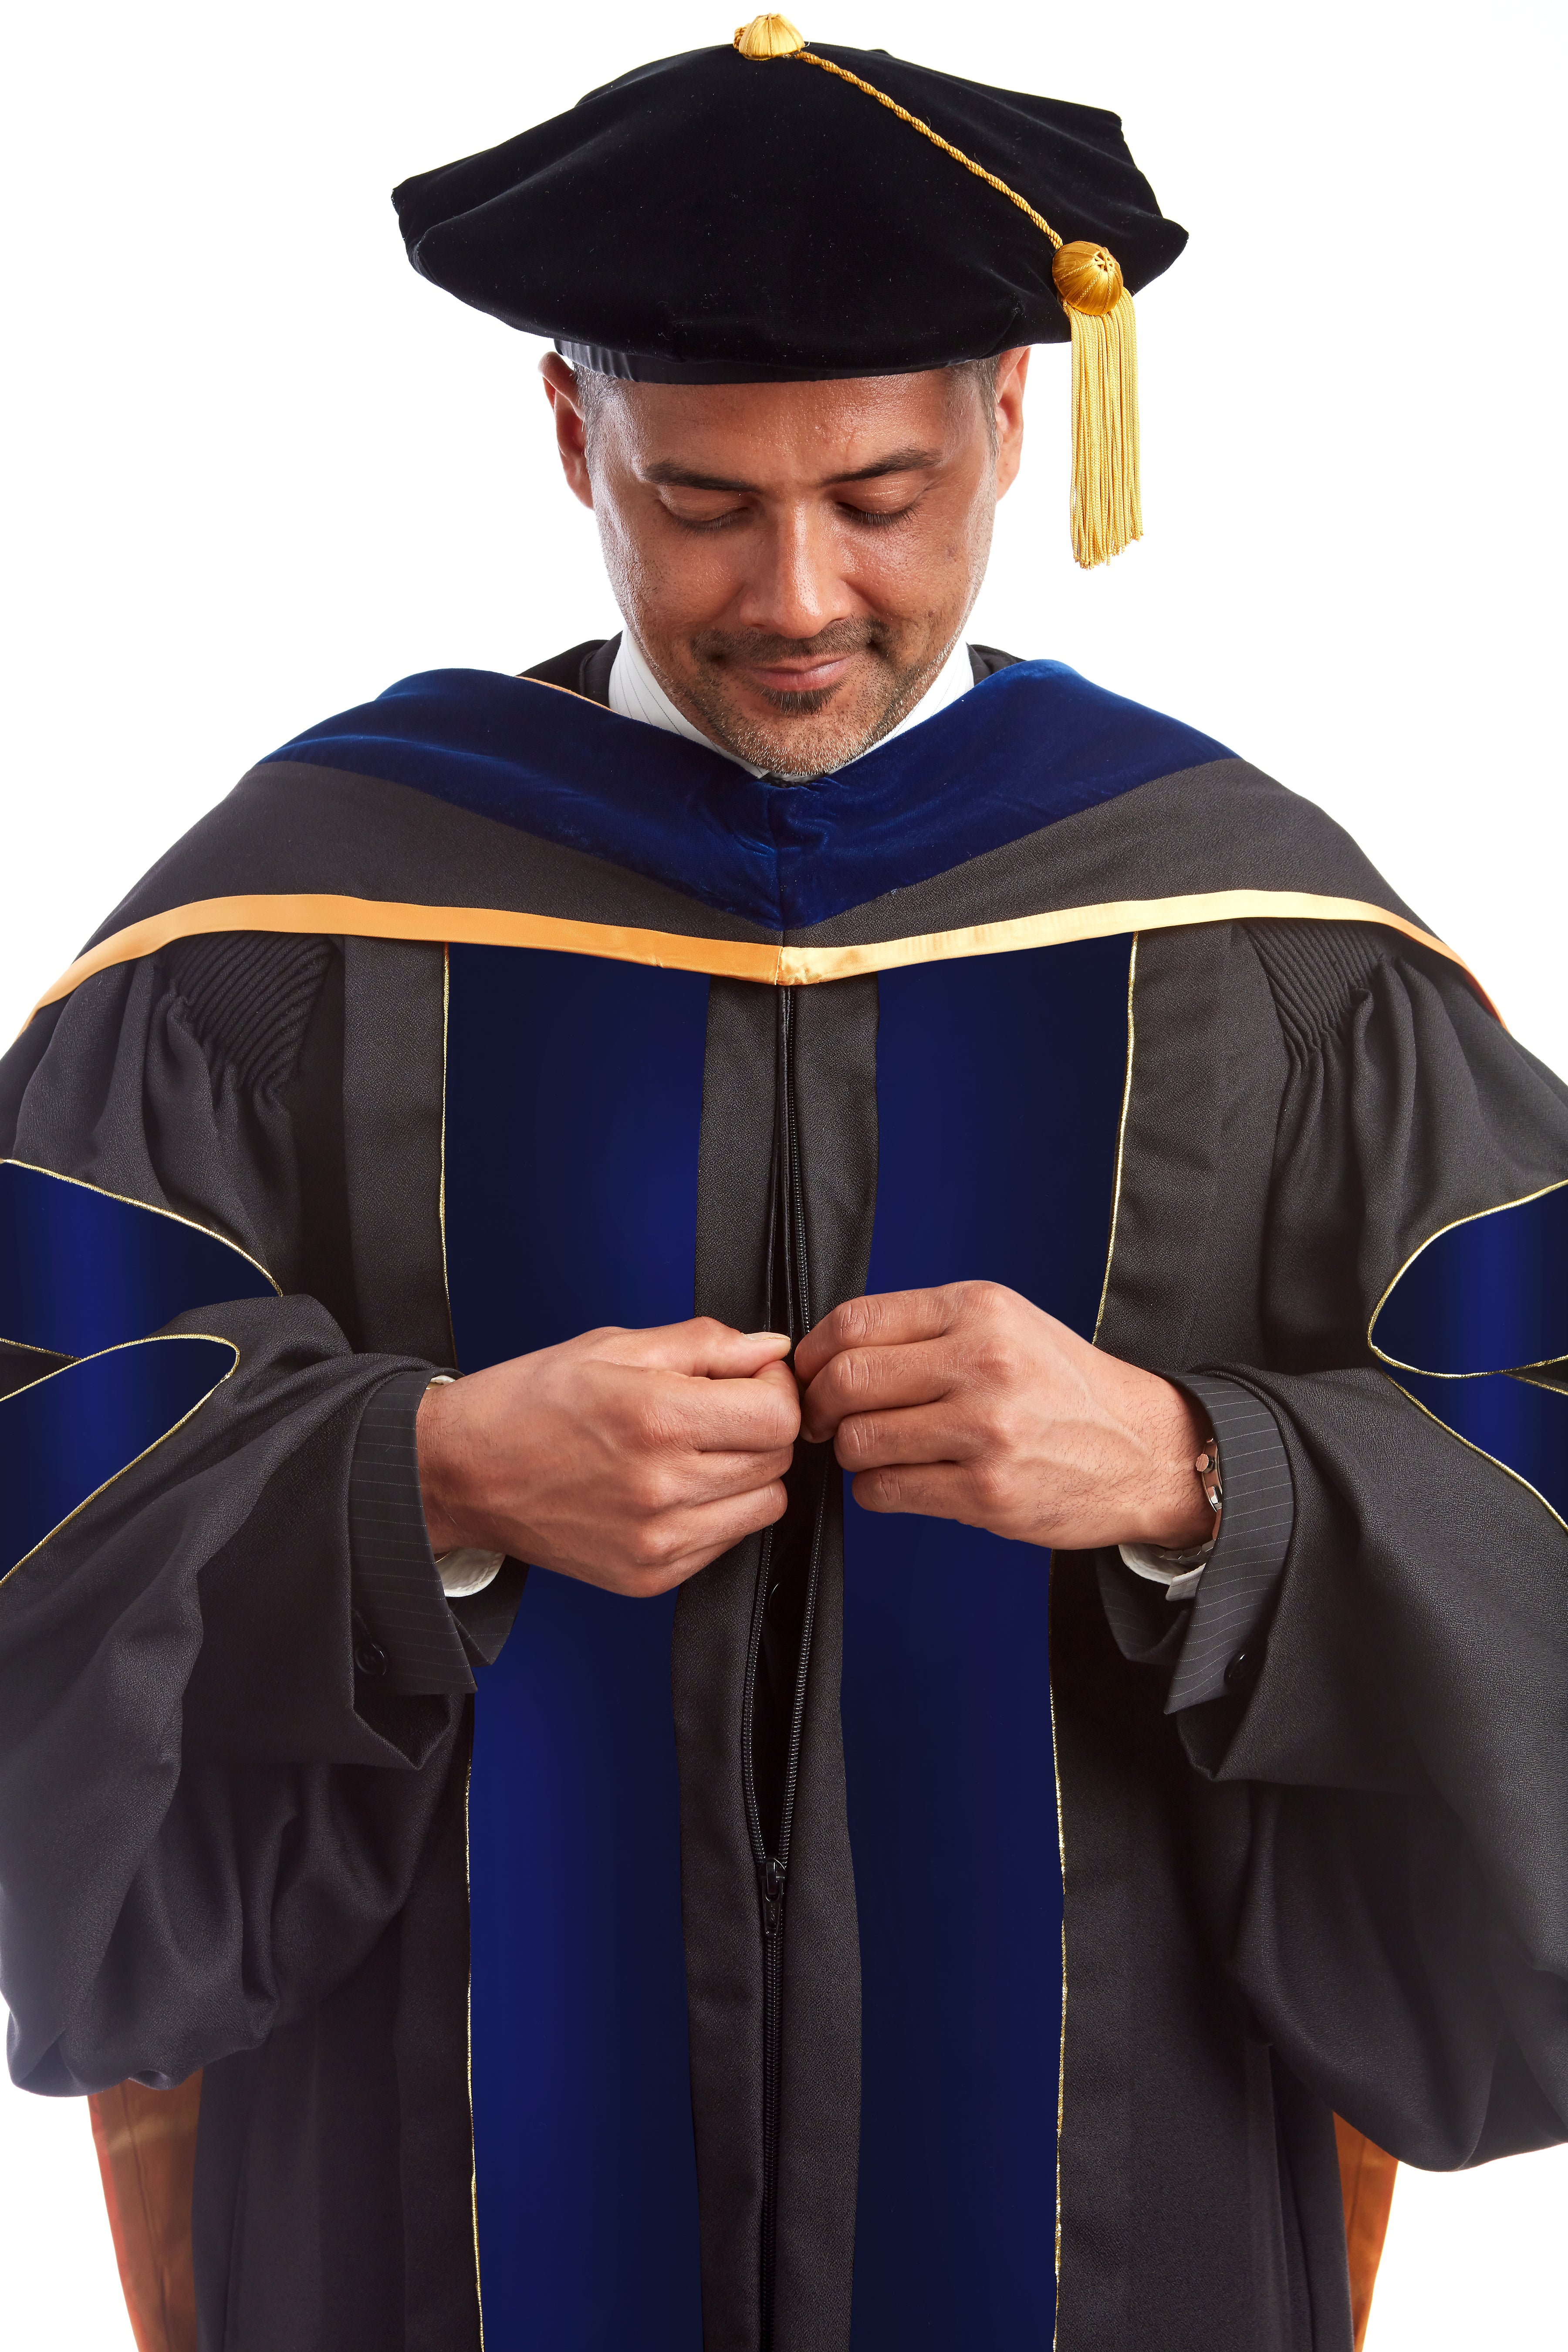 Academic Regalia and doctoral gowns